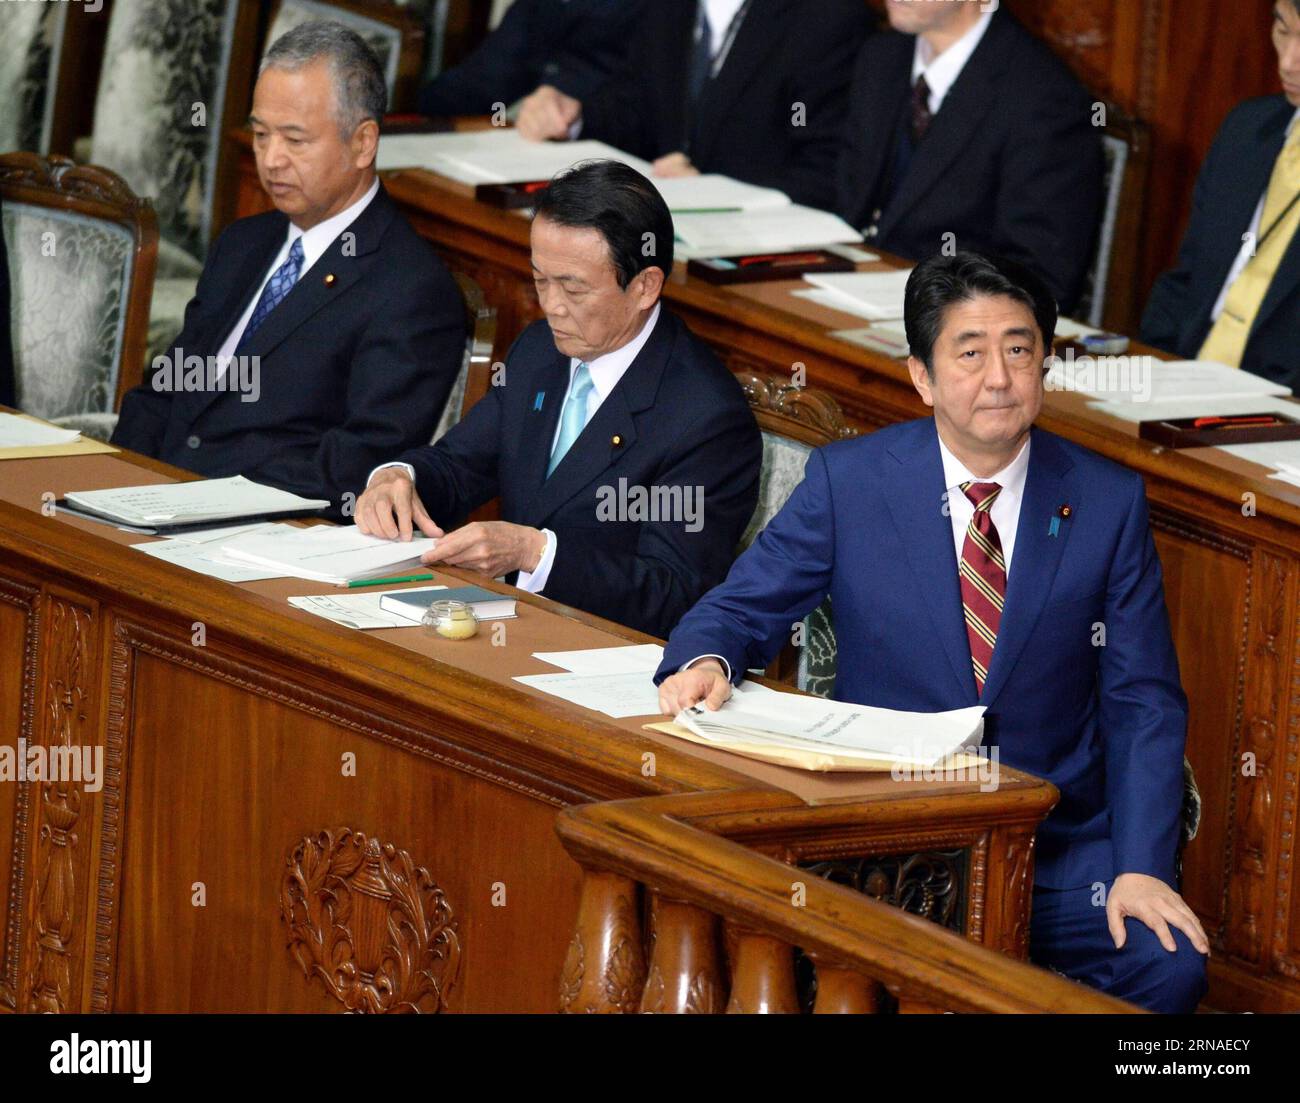 (160122) -- TOKYO, Jan. 22, 2016 -- Japanese Prime Minister Shinzo Abe (1st R) prepares to deliver his policy speech during a session of the House of Representatives in Tokyo, Japan, on Jan. 22, 2016. Japanese Prime Minister Shinzo Abe sought to gain more votes from lower income class for the upcoming upper house election by vowing to address wage gaps in his policy speech on Friday. ) JAPAN-TOKYO-ABE-POLICY SPEECH MaxPing PUBLICATIONxNOTxINxCHN   160122 Tokyo Jan 22 2016 Japanese Prime Ministers Shinzo ABE 1st r Prepares to Deliver His Policy Speech during a Session of The House of Representa Stock Photo